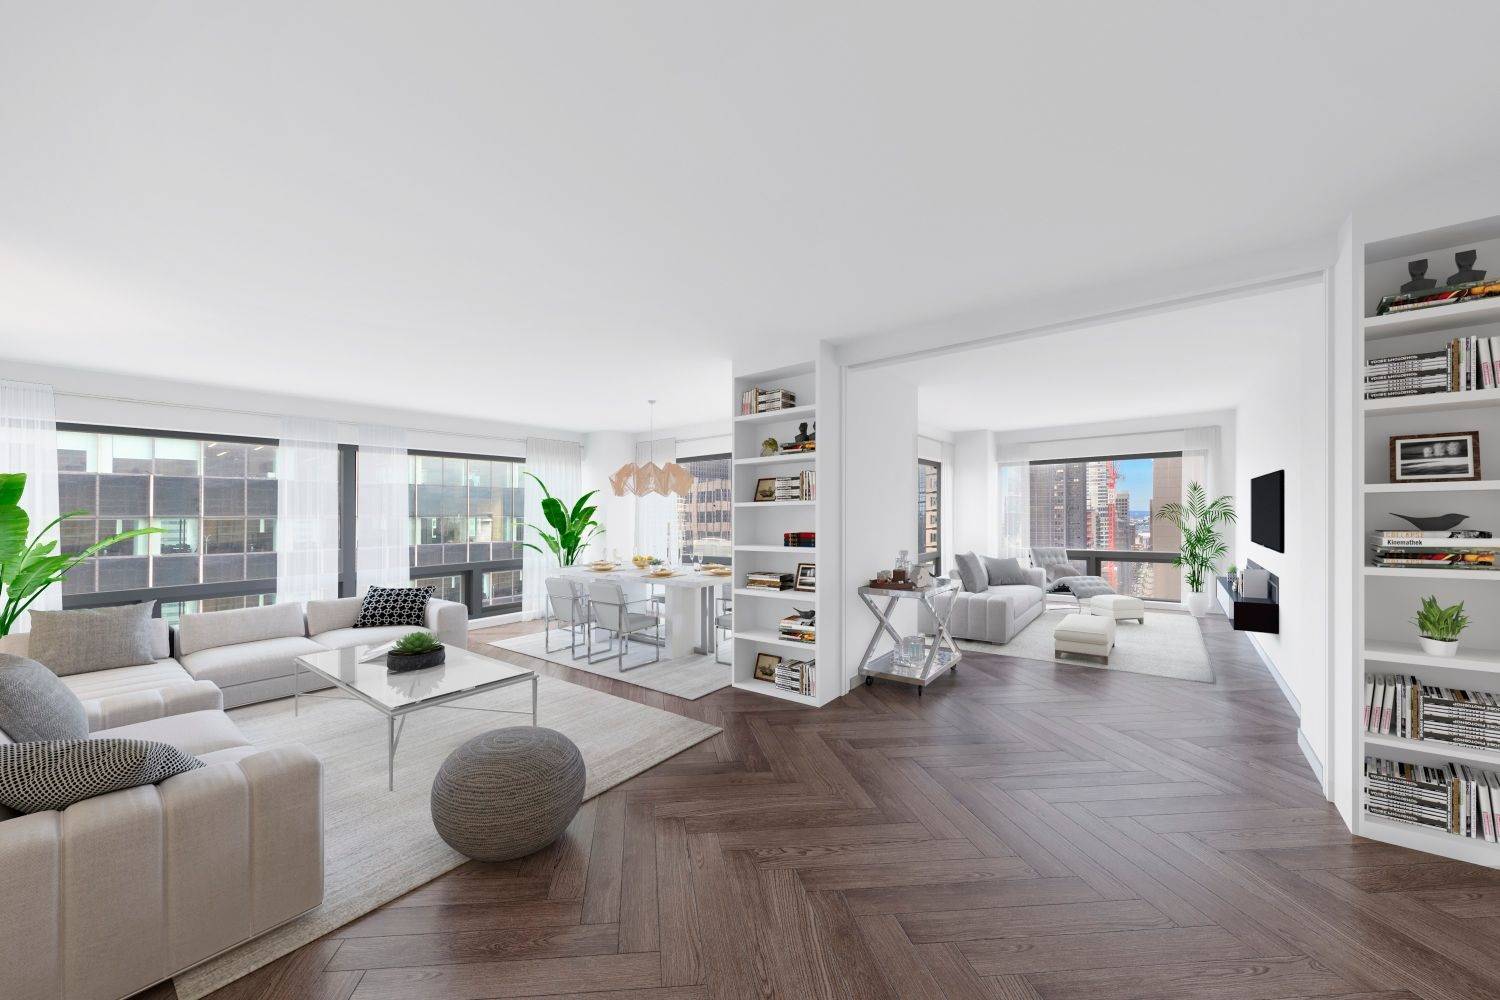 Ideally situated on a prime stretch of iconic Fifth Avenue with convenient access to the city's finest shopping, business and cultural landmarks, this sophisticated and serene residence at Trump Tower ...